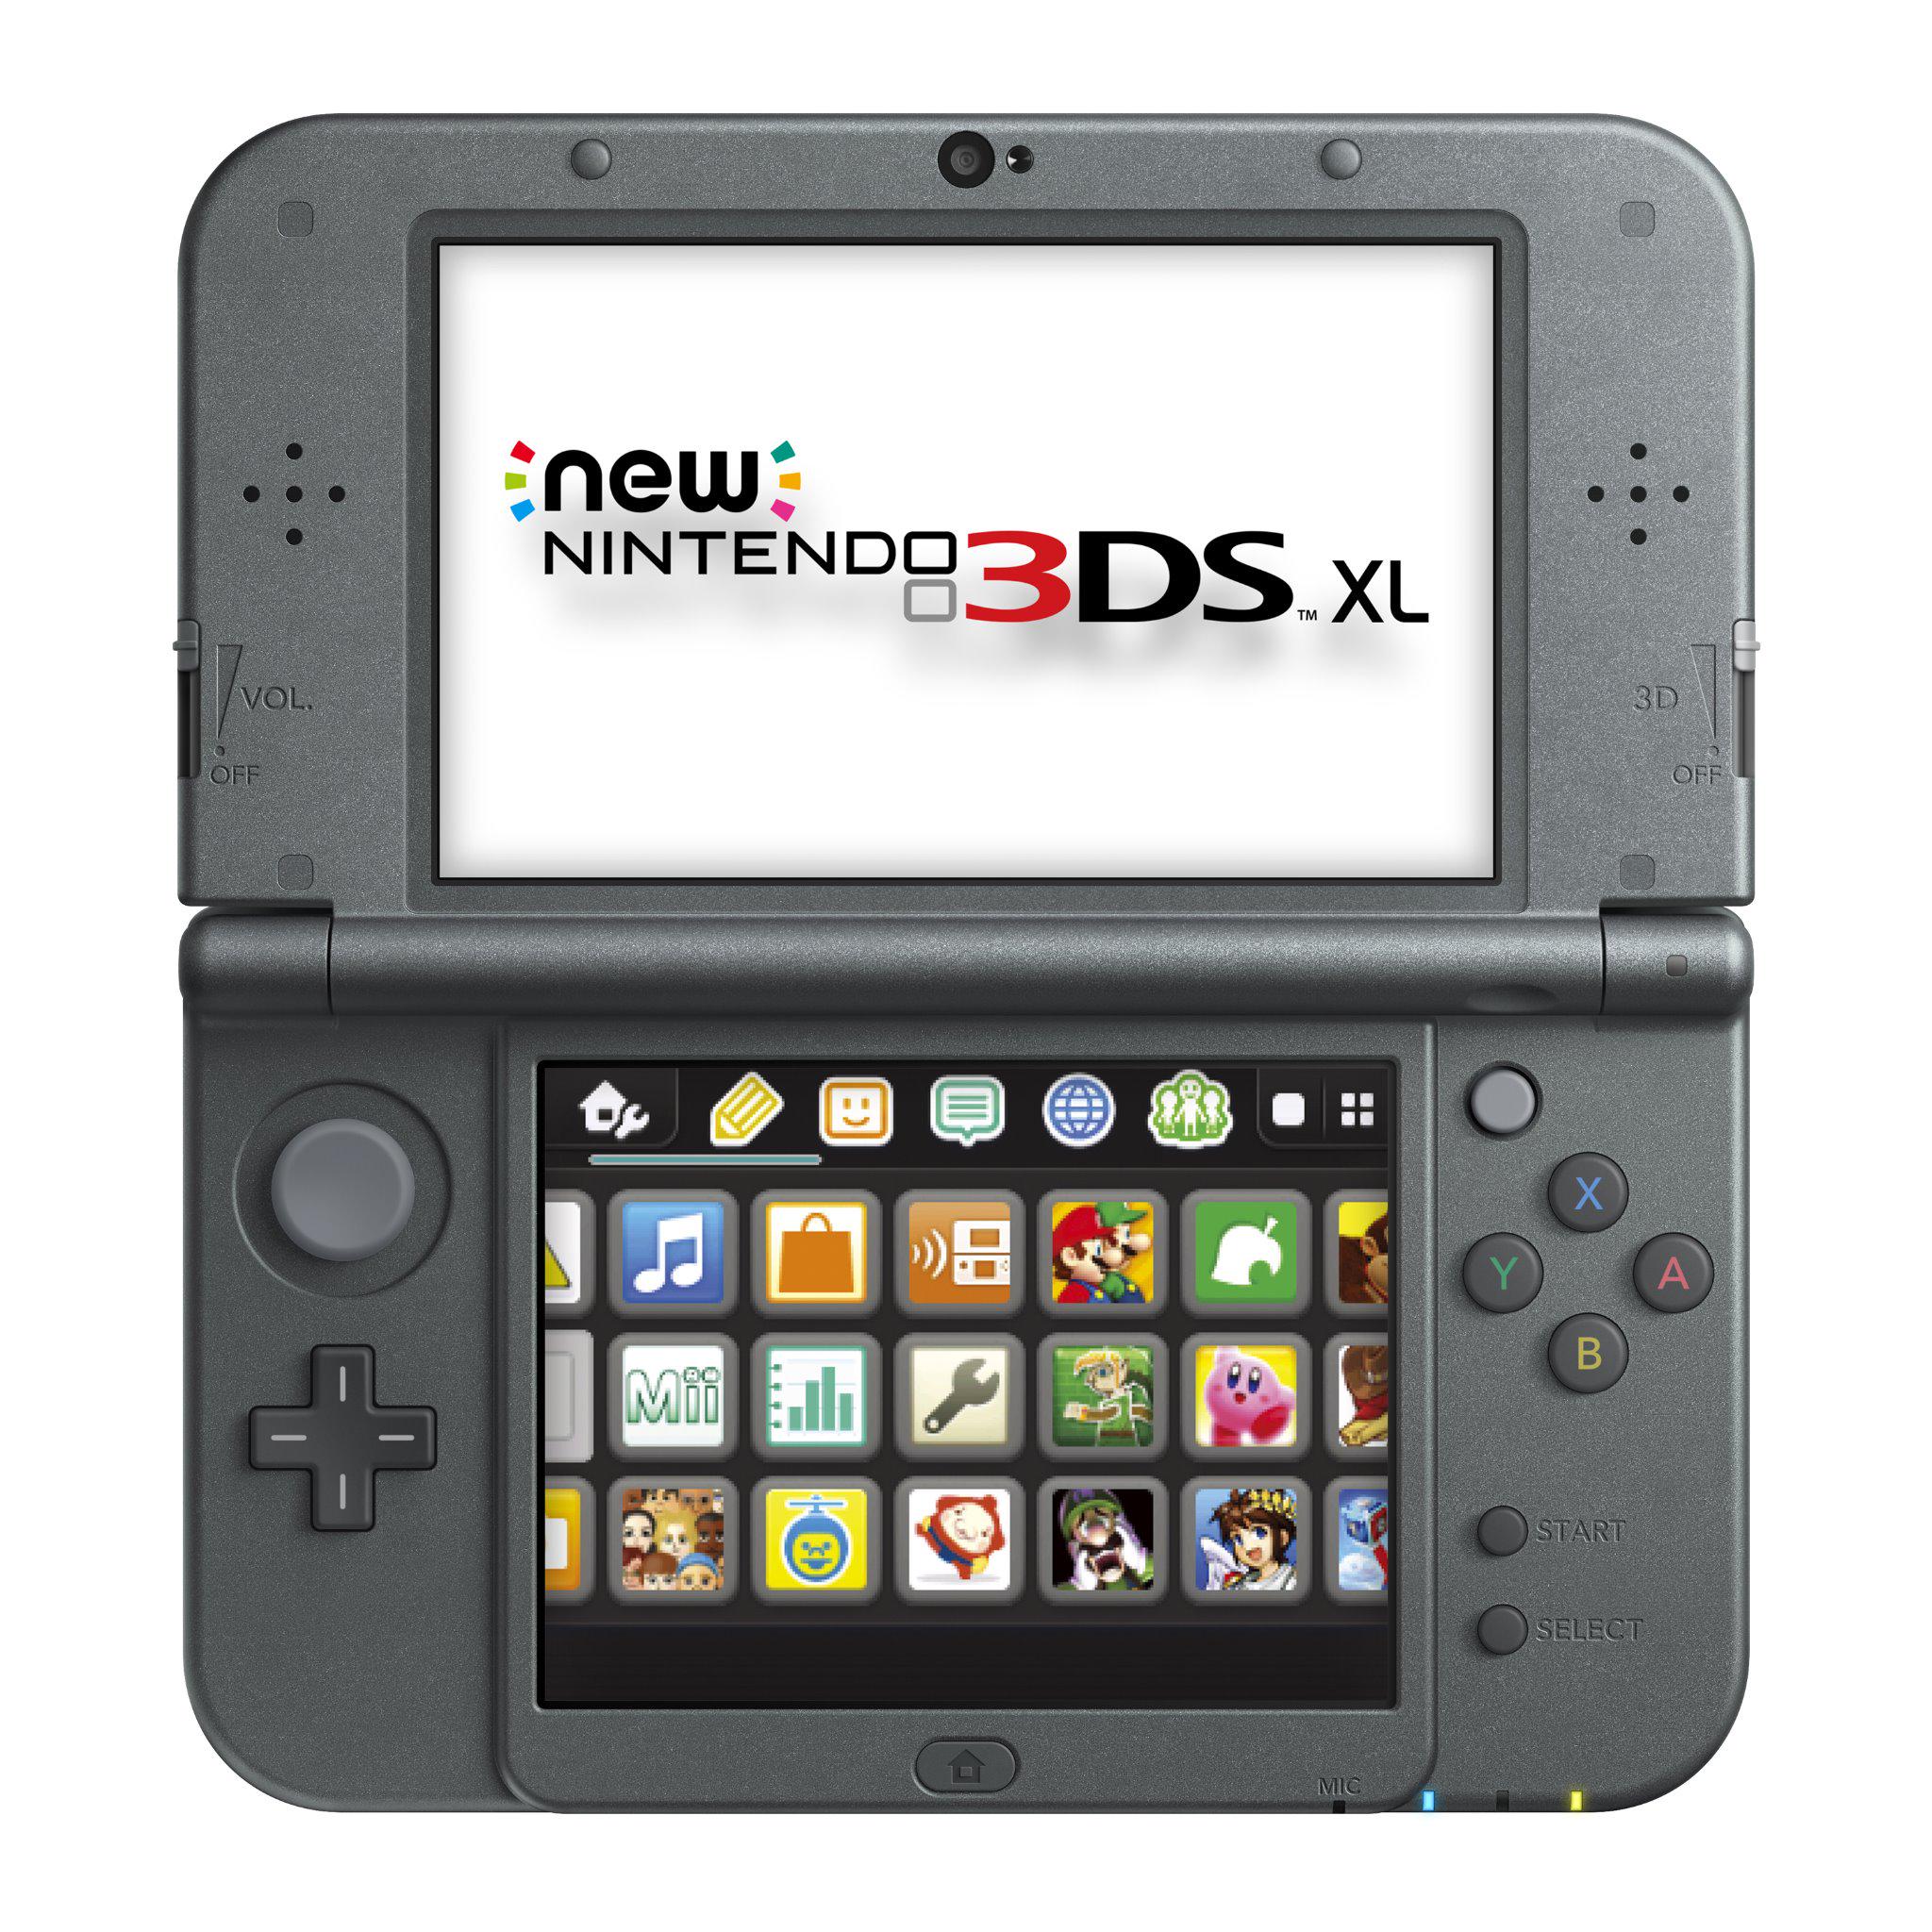 Nintendo of America on Twitter: "New Nintendo 3DS XL is coming to the U.S. on 2/13 at a suggested retail price of $199.99! http://t.co/sAjWzoLEoL" Twitter